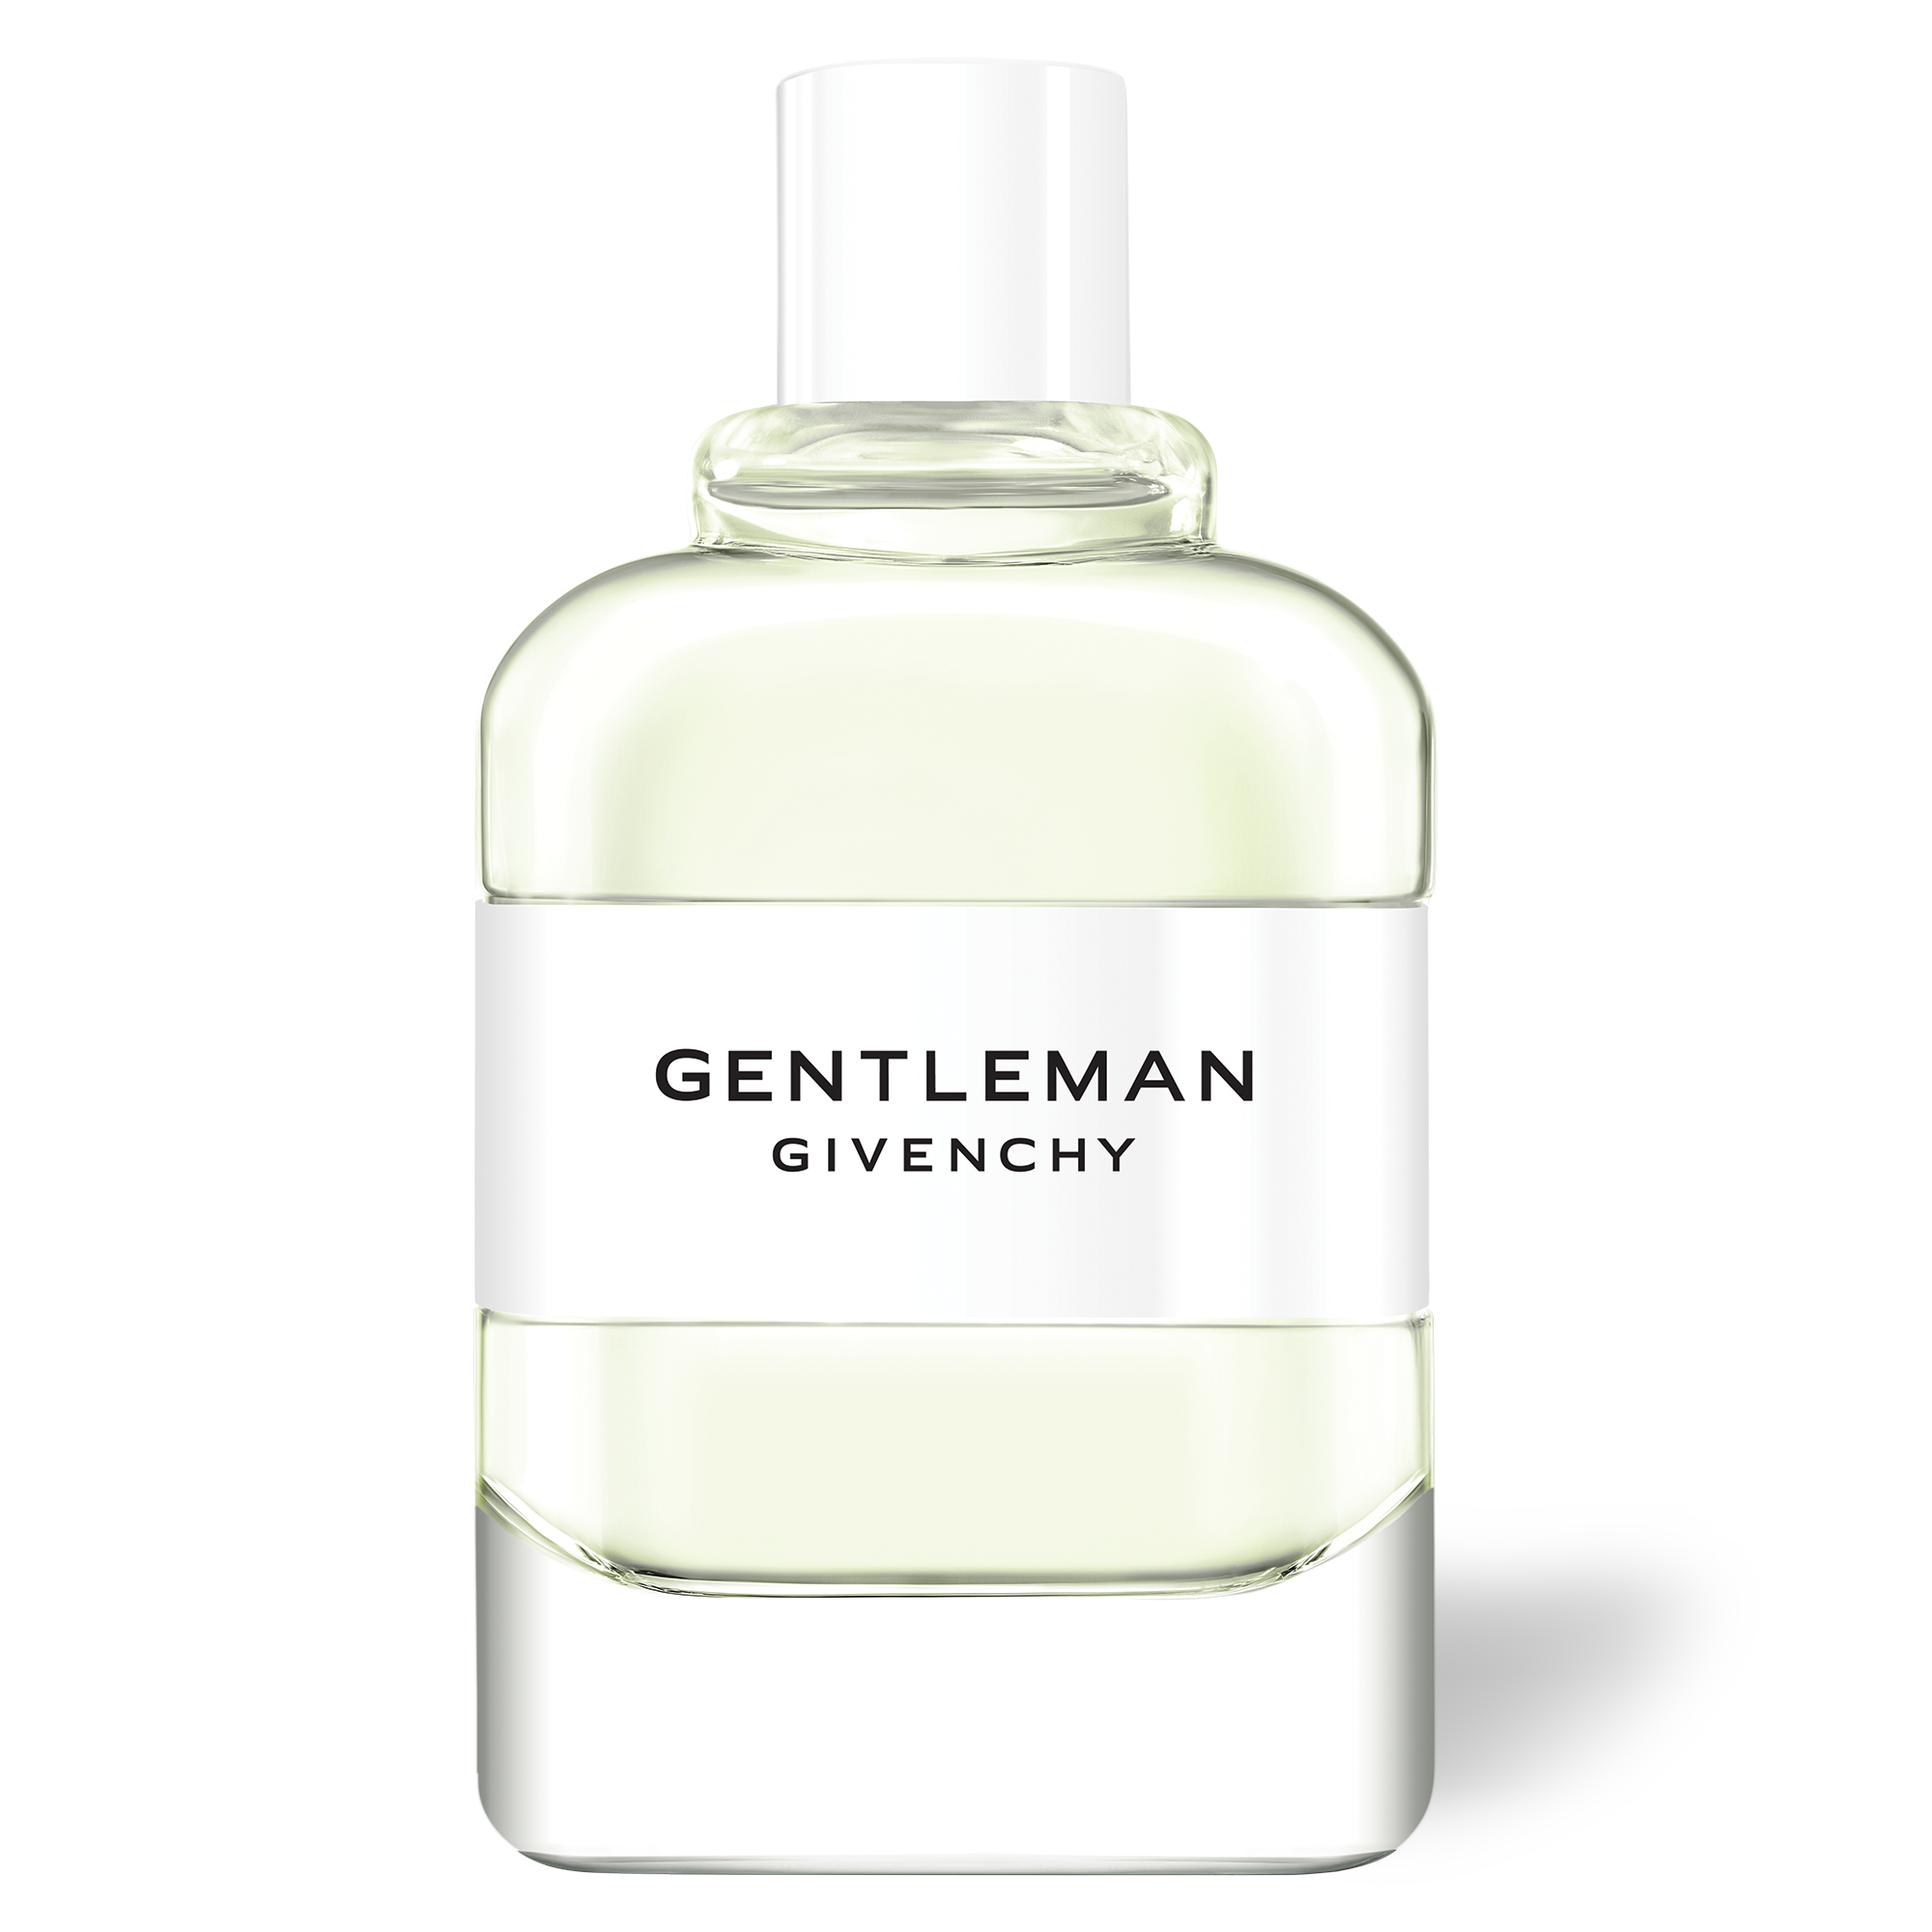 GENTLEMAN GIVENCHY COLOGNE ∷ GIVENCHY